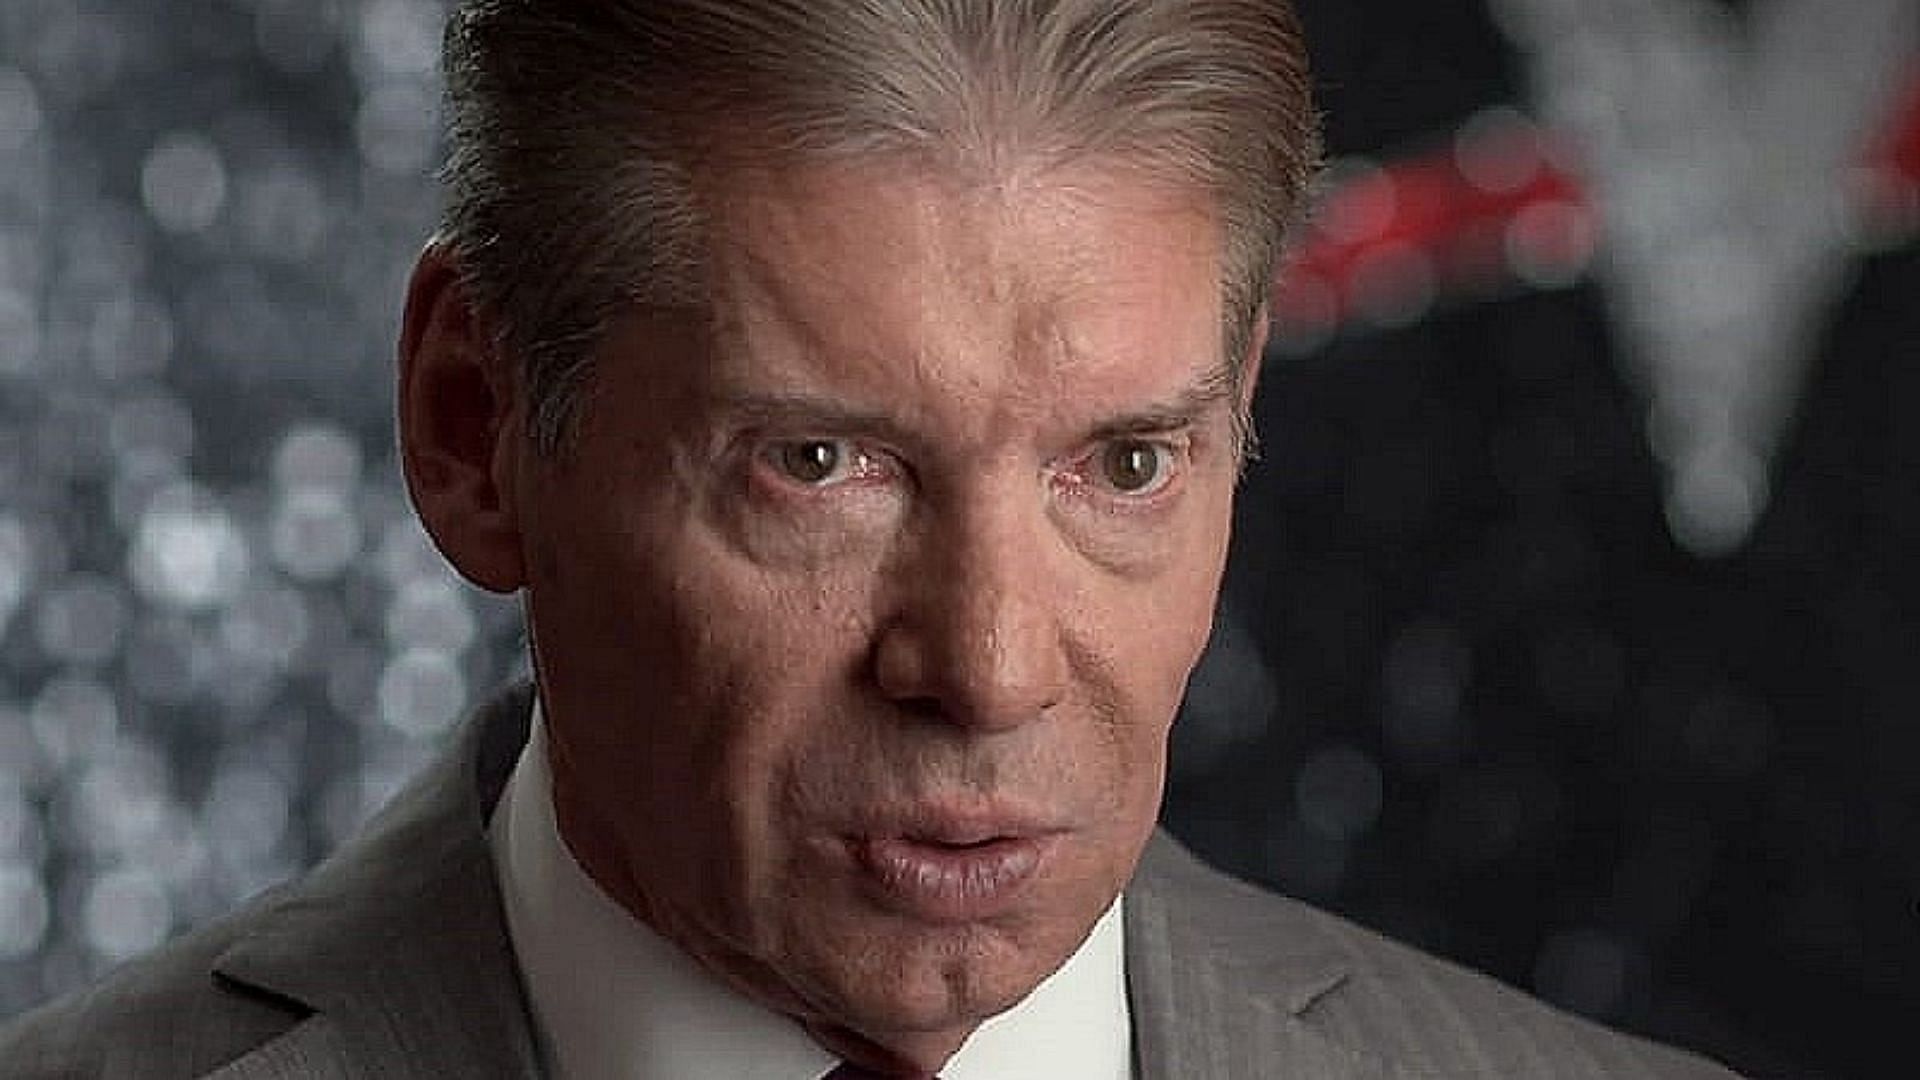 Vince McMahon is the former Chairman and CEO of WWE